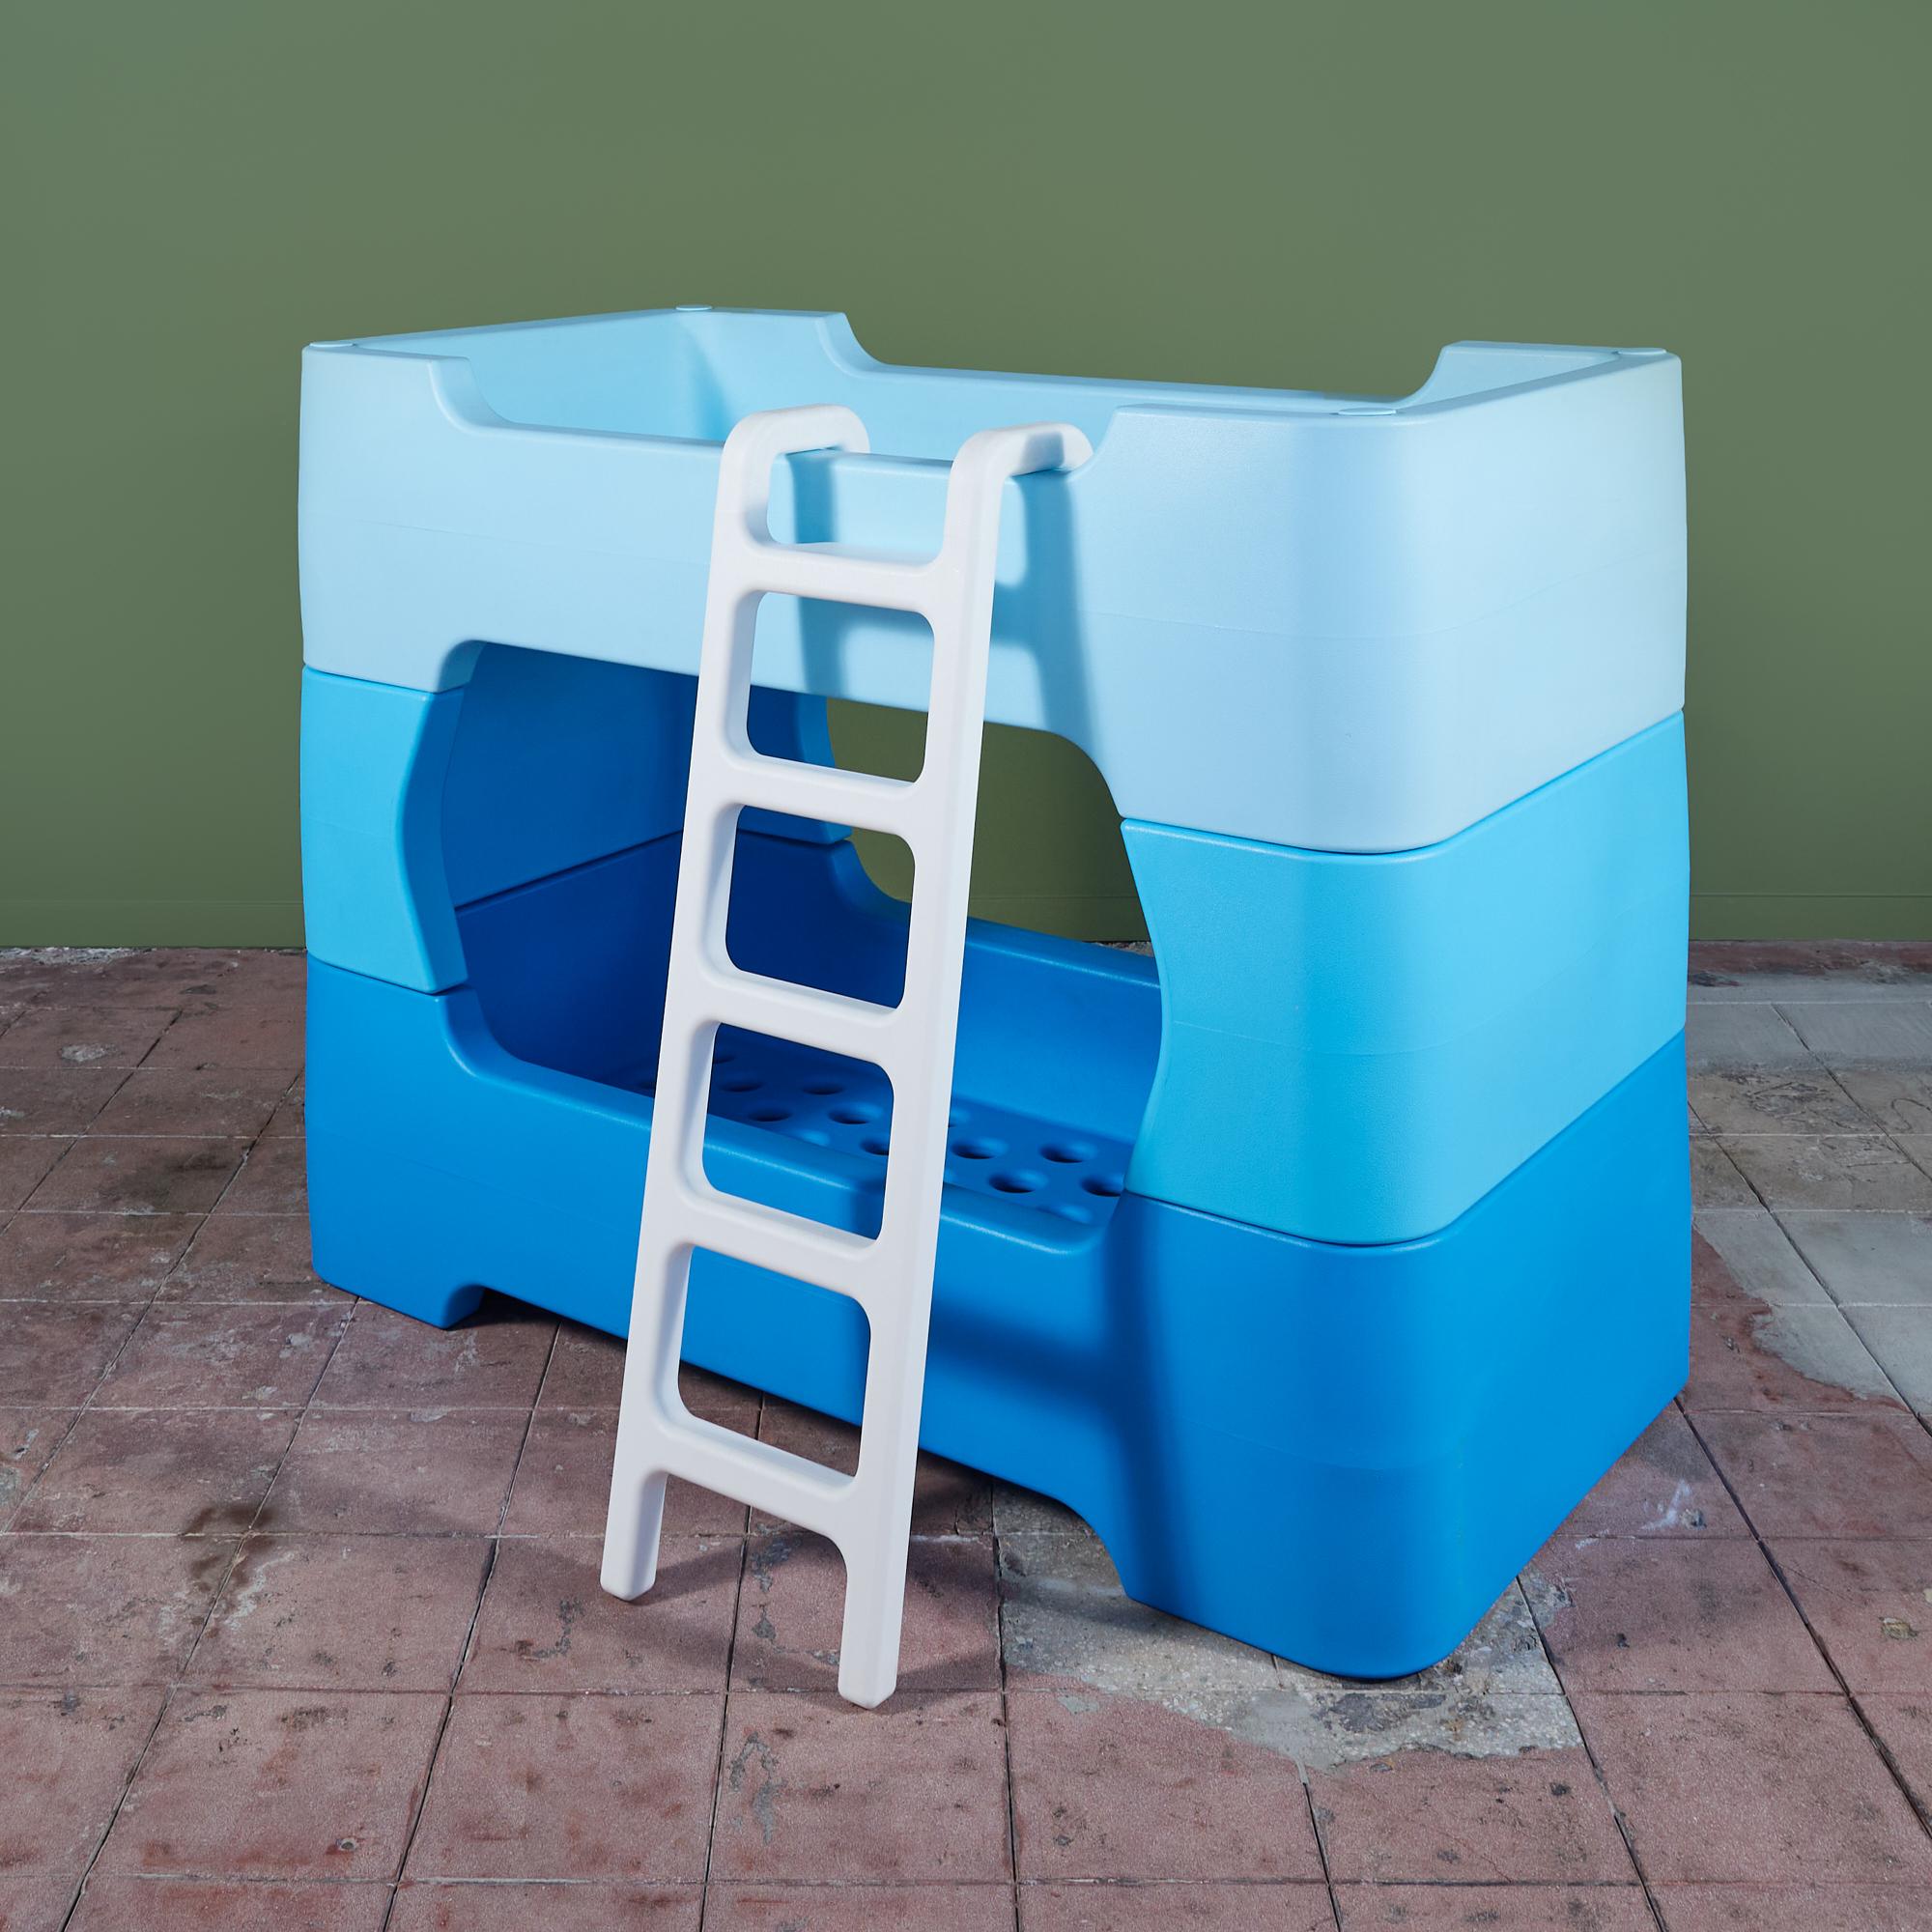 Bunky bunk bed by Marc Newson for Magis c. 2011, Italy, is a moulded plastic modular system made to stack or be used as two separate sleeping beds. The bed was Newsom's first deign for children and it's rounded edges and playful colors make it